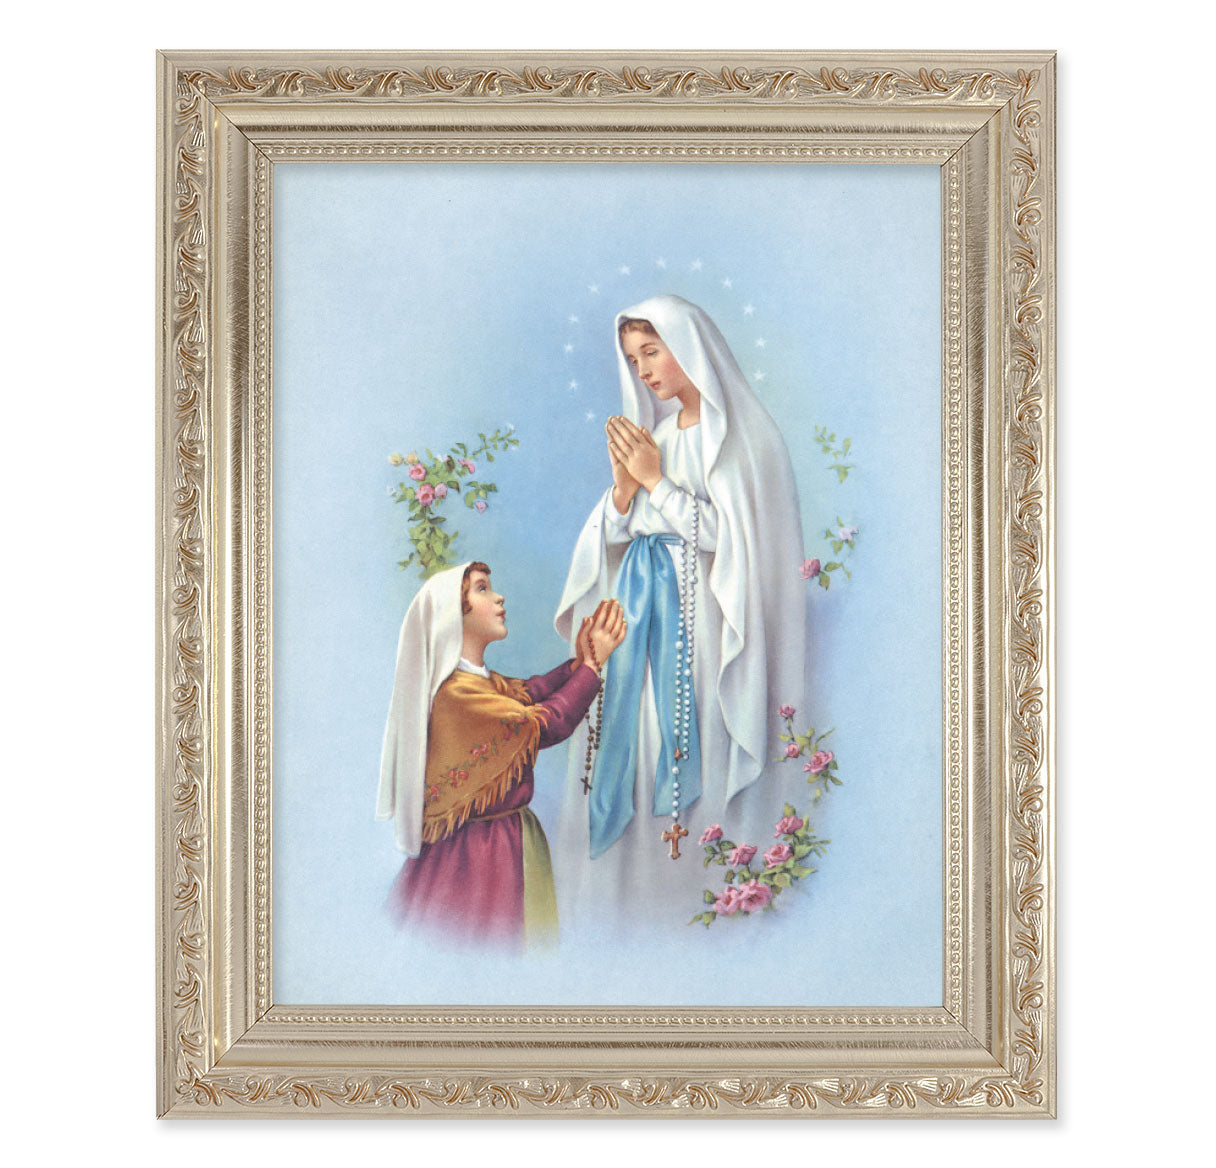 Our Lady of Lourdes Antique Silver Framed Art